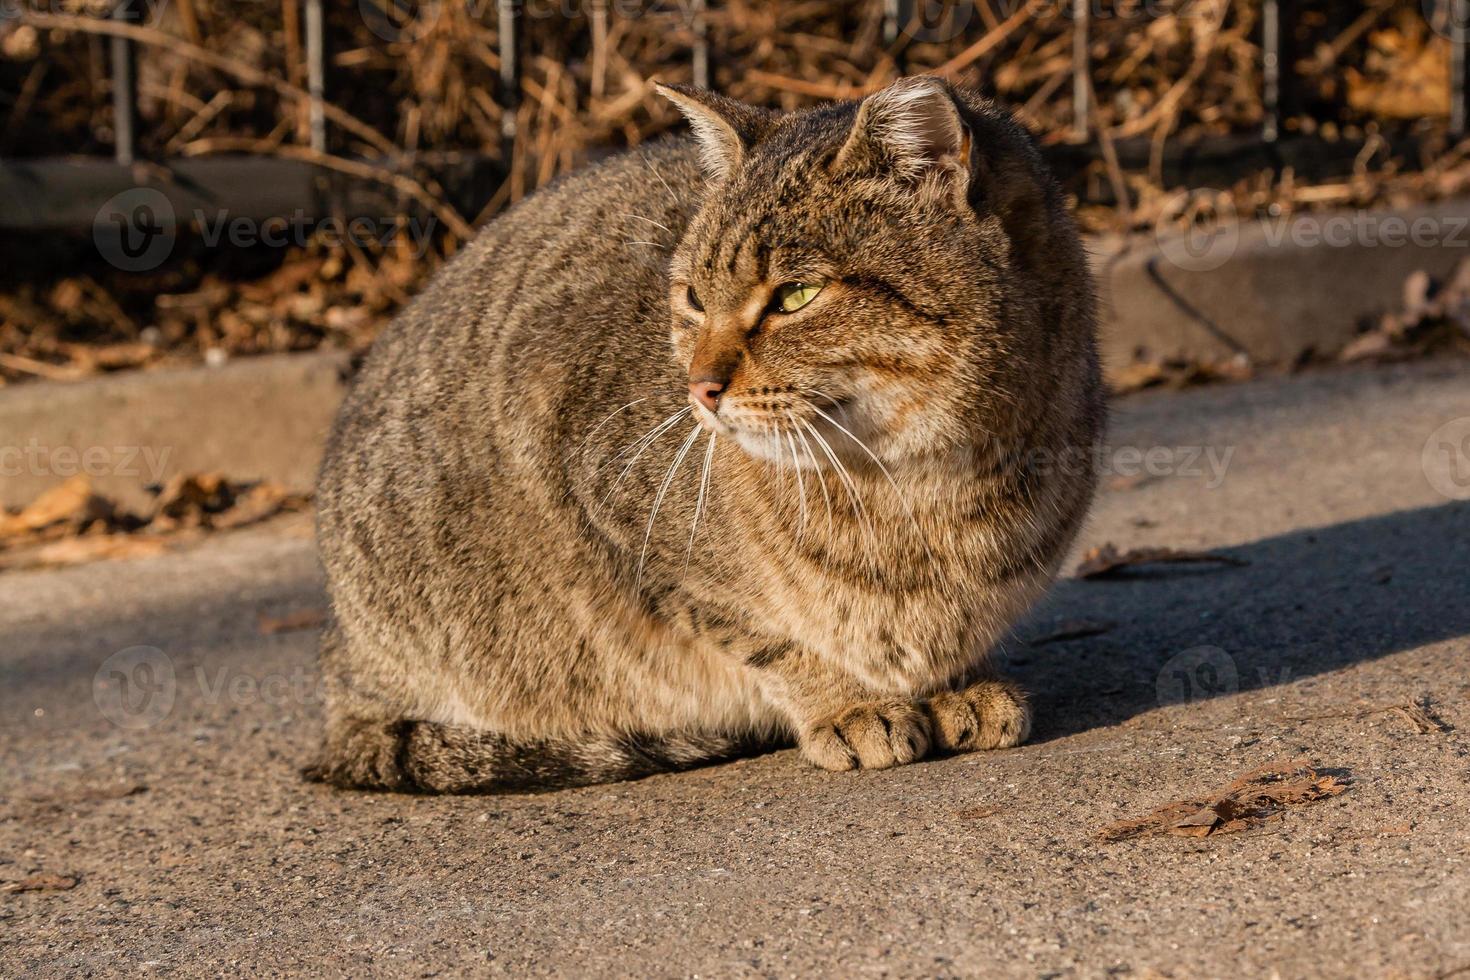 The street cat is heated in the sun's rays photo